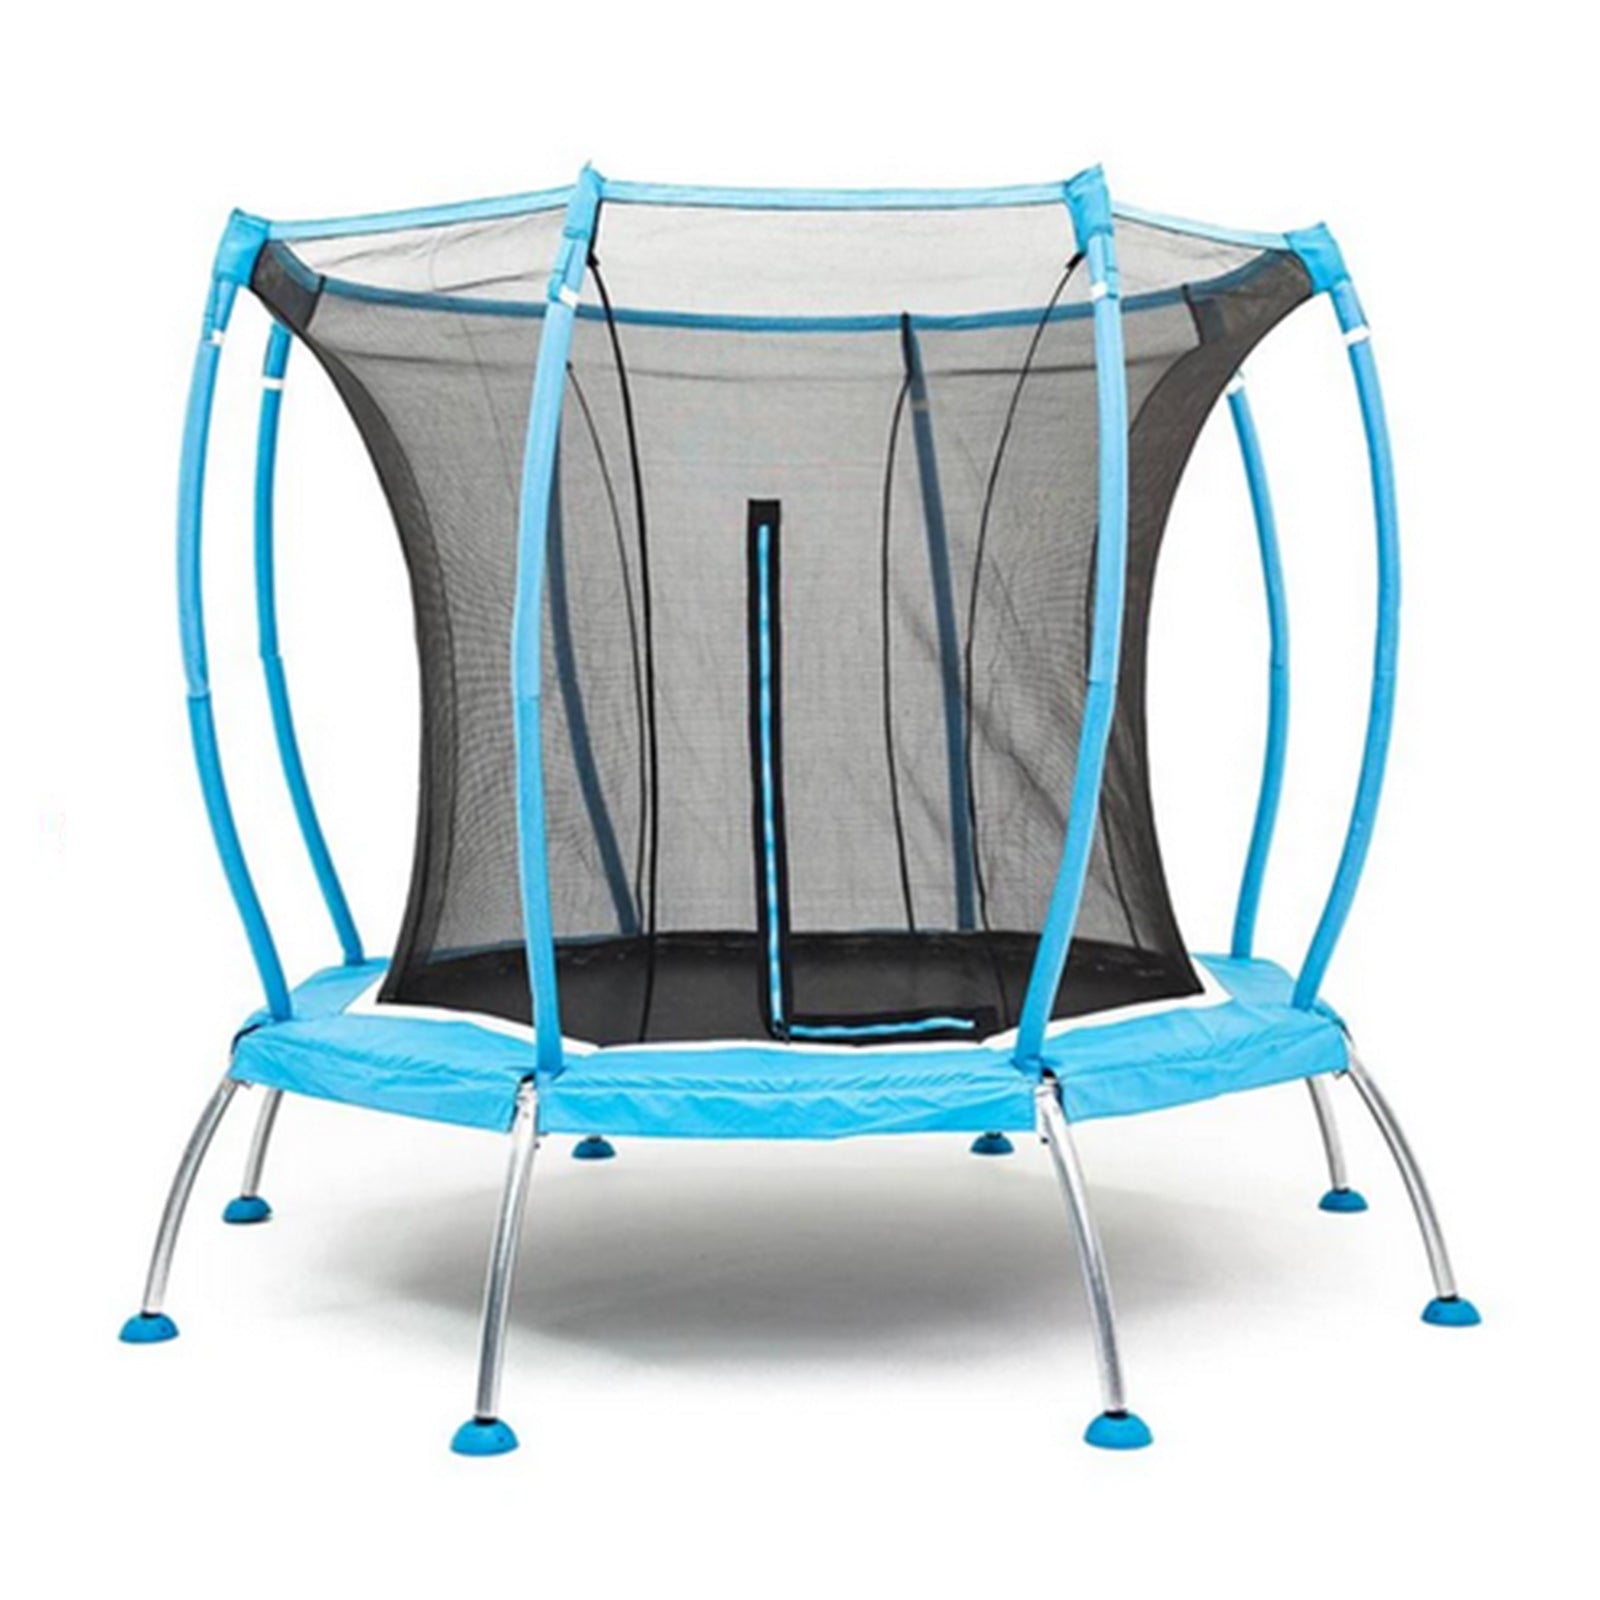 Net for 8 foot Atmos Trampoline - Blue (Part C).